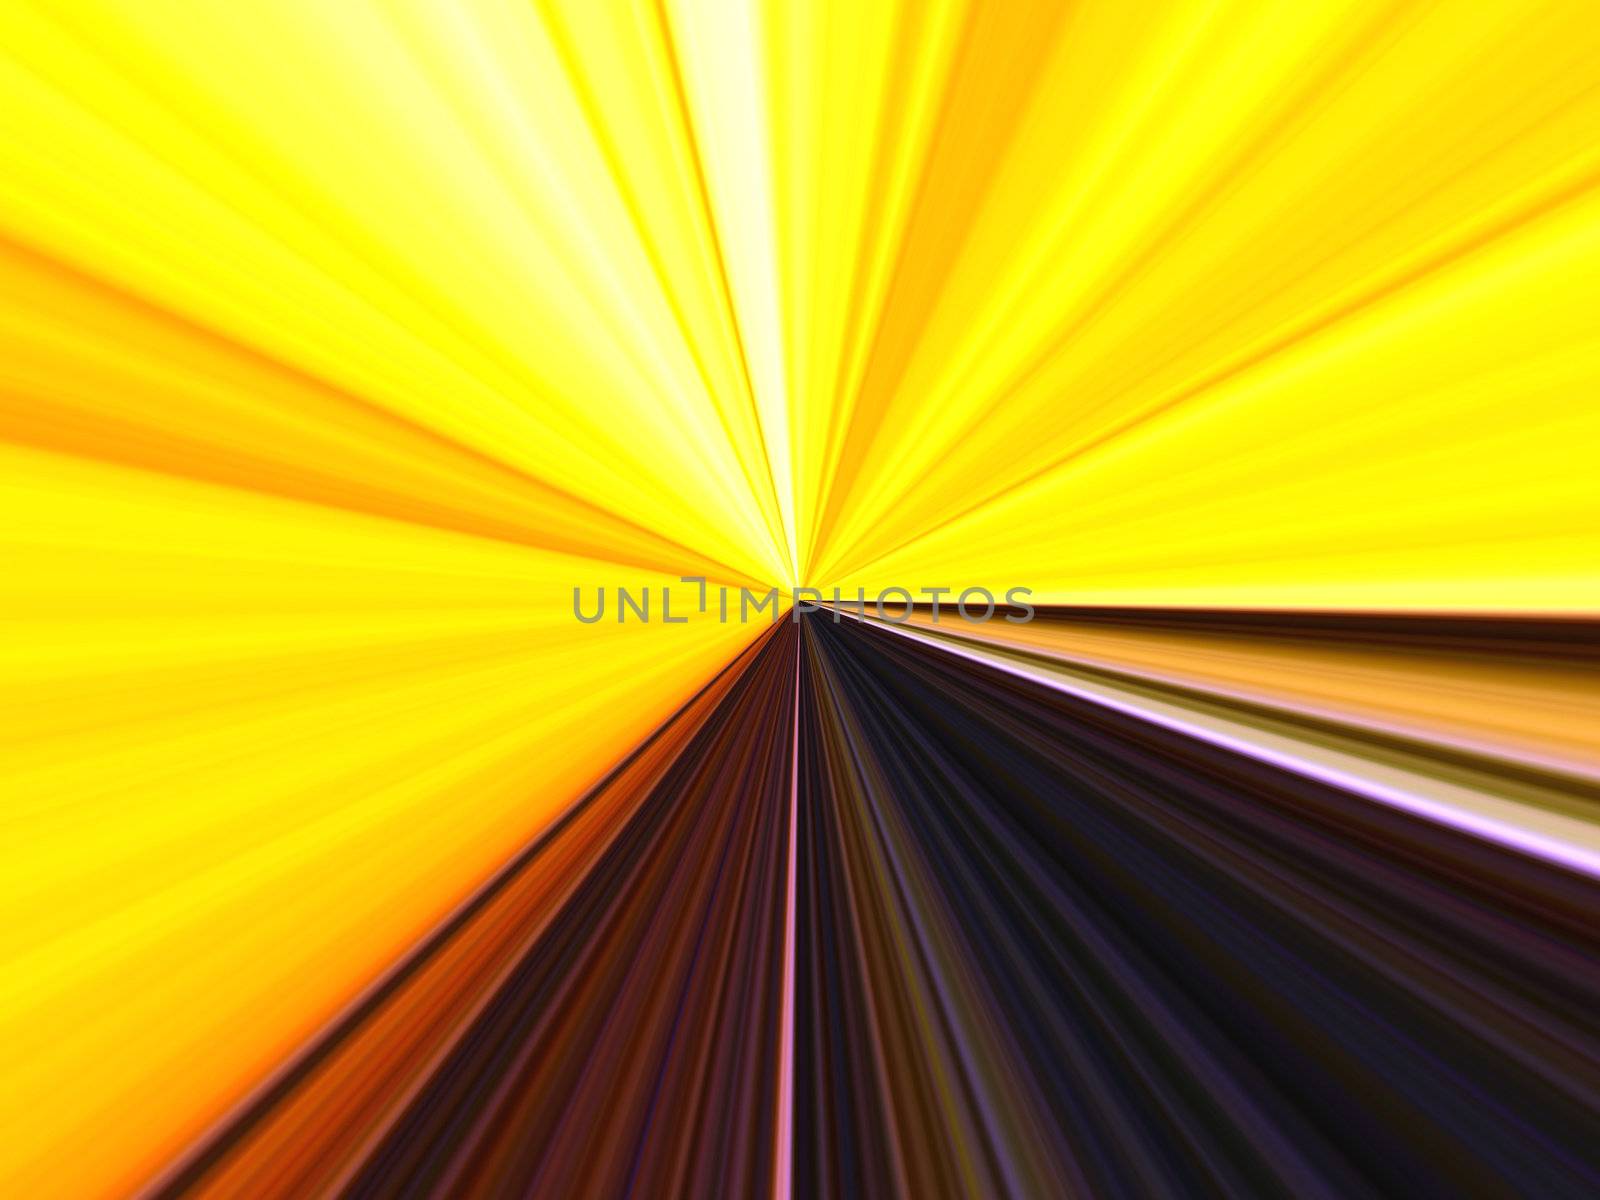 multi-colored abstract resembling travel through a tunnel at high speed